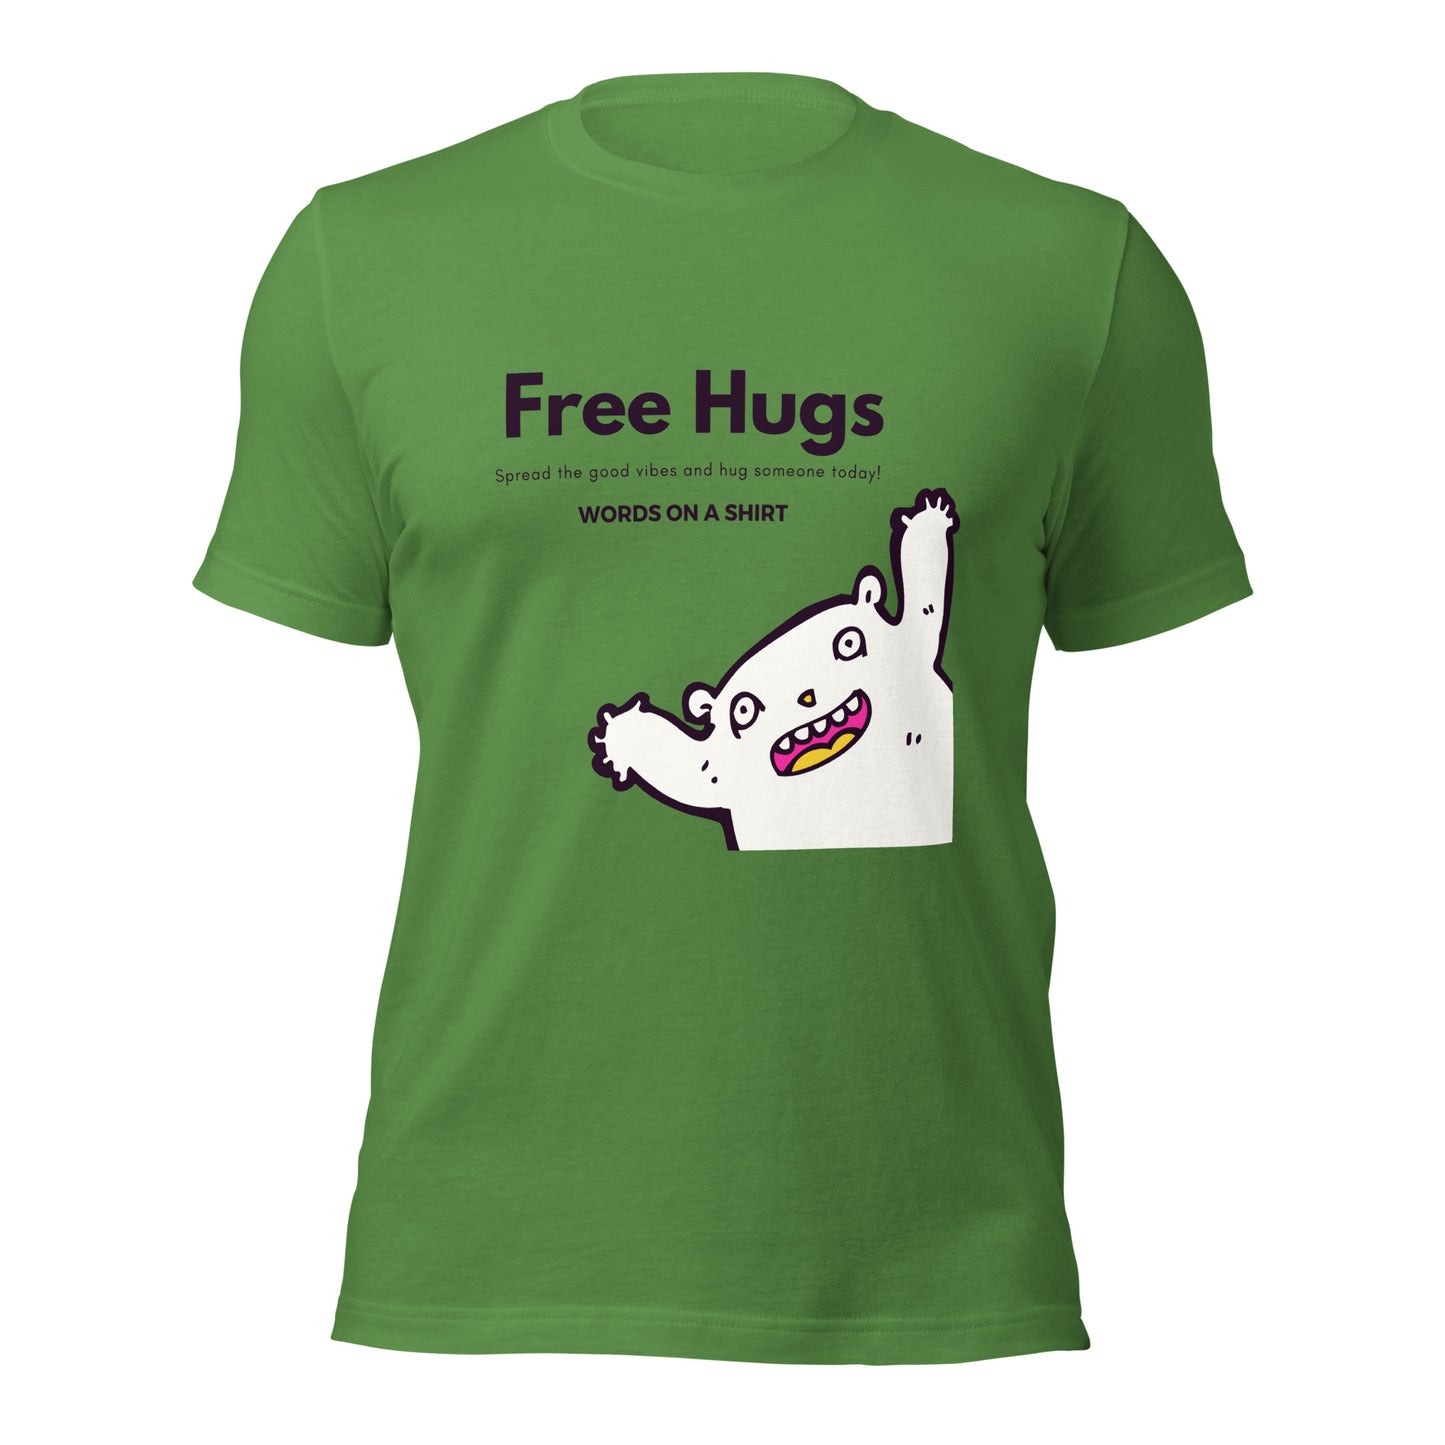 Don't miss out on this chance to snag the ultimate cotton tee. Pre-shrunk, side-seamed and perfectly tailored - this piece of apparel is ready to conquer! Take the plunge with our Free Hugs Collection and join the revolution!